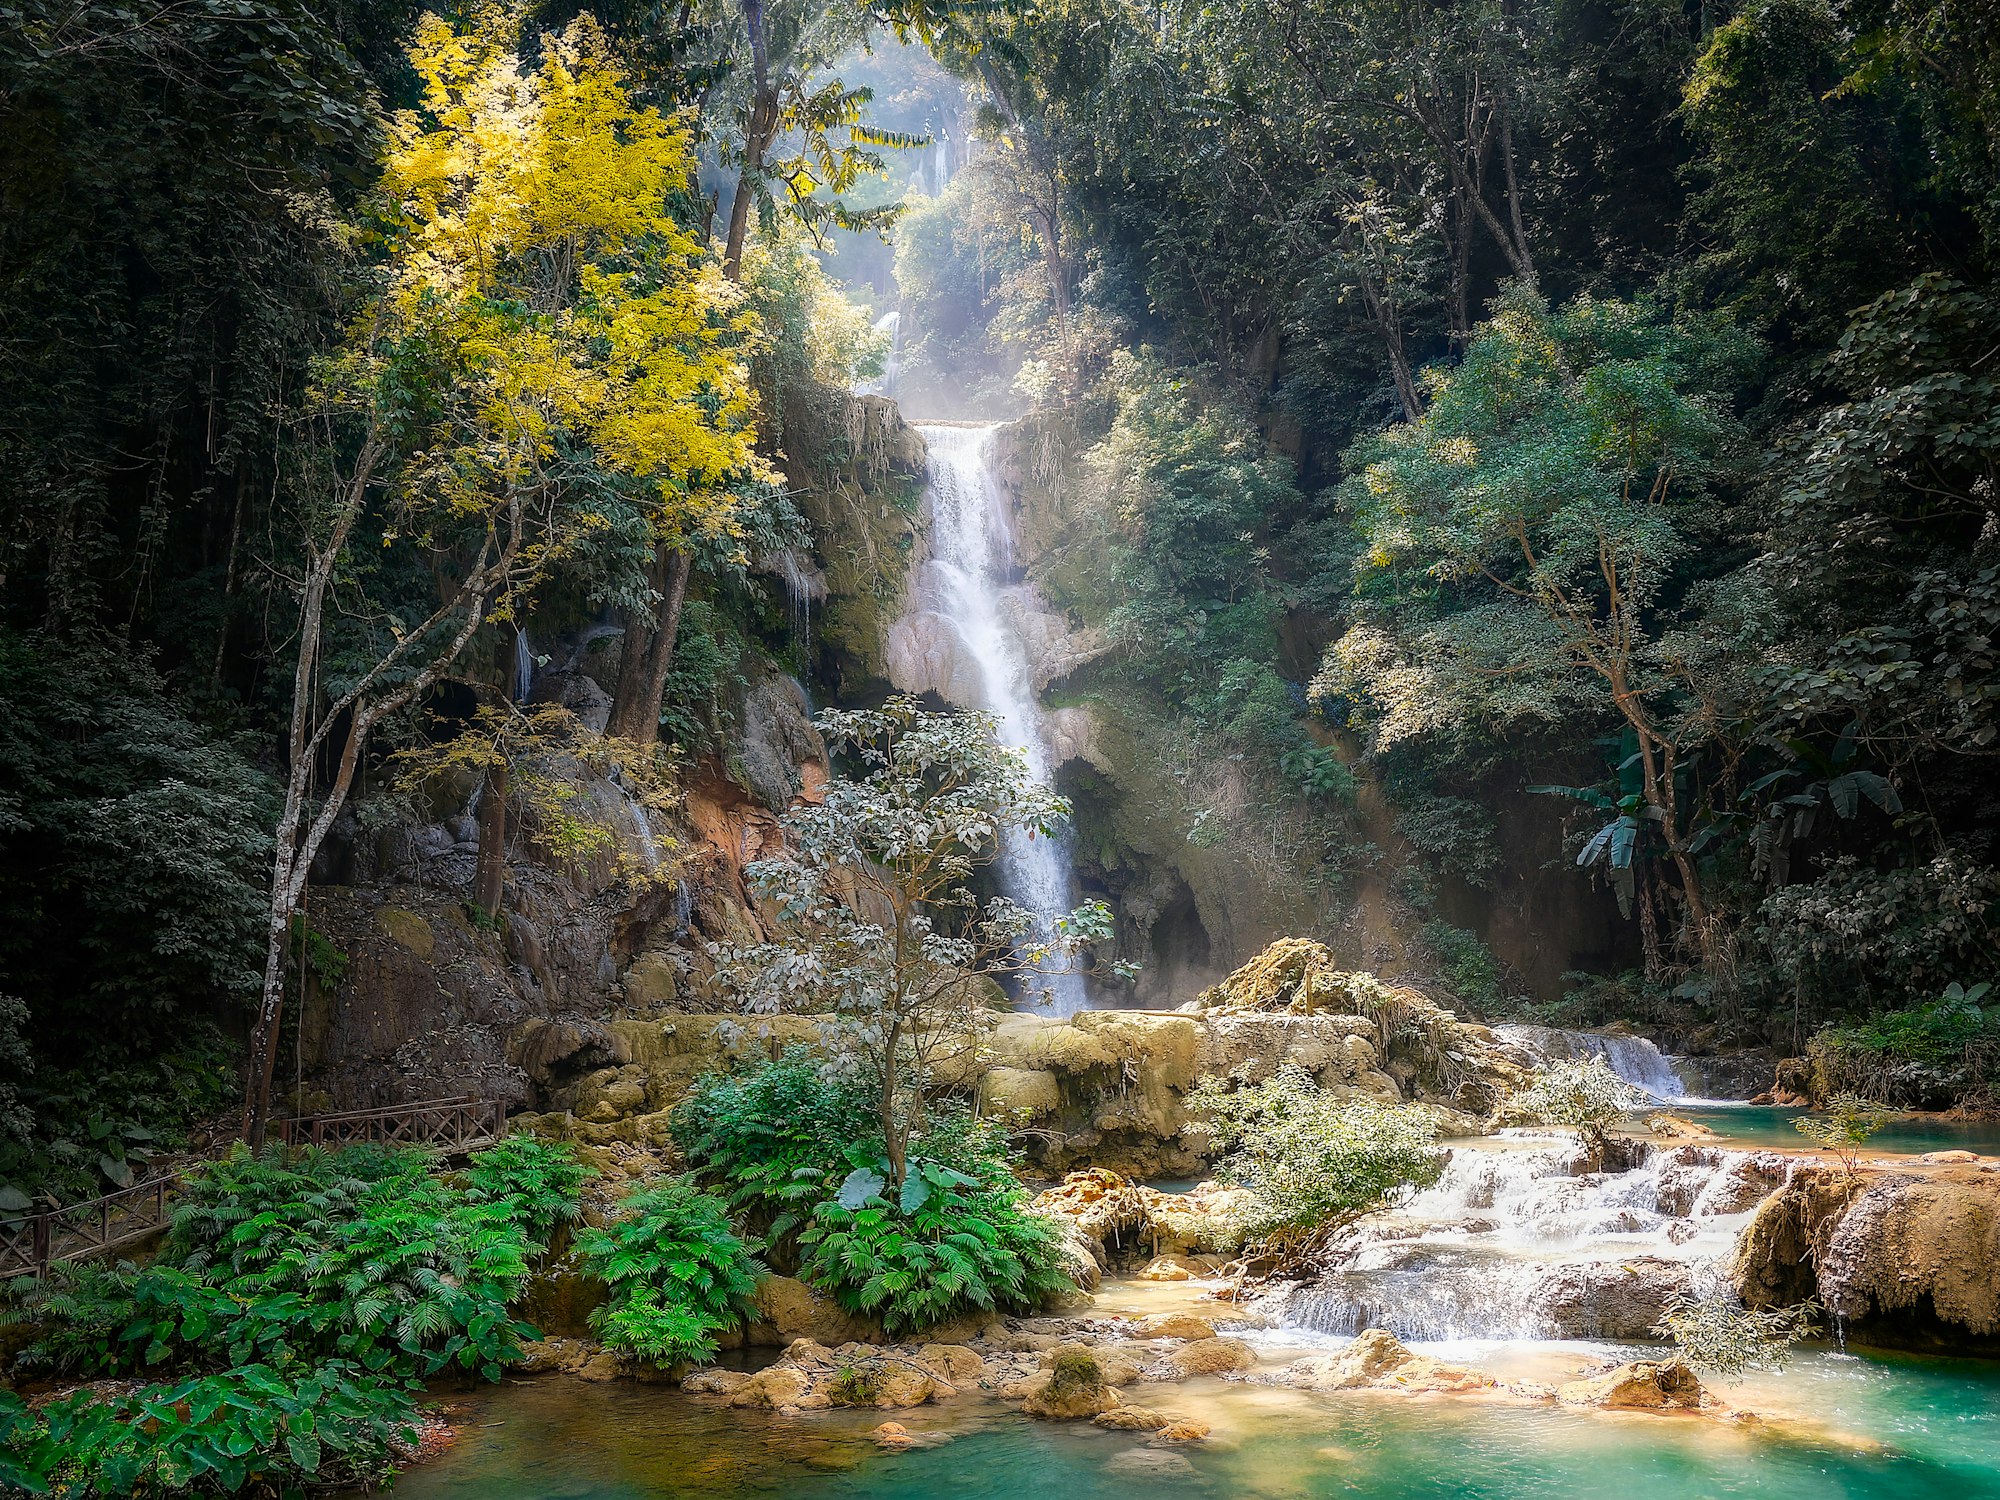 Find this one place in your heart —
so you can return anytime,
if needed.

#waterfall #cascade #idyllic #dream #fairyland #laos #amazingplace #asia